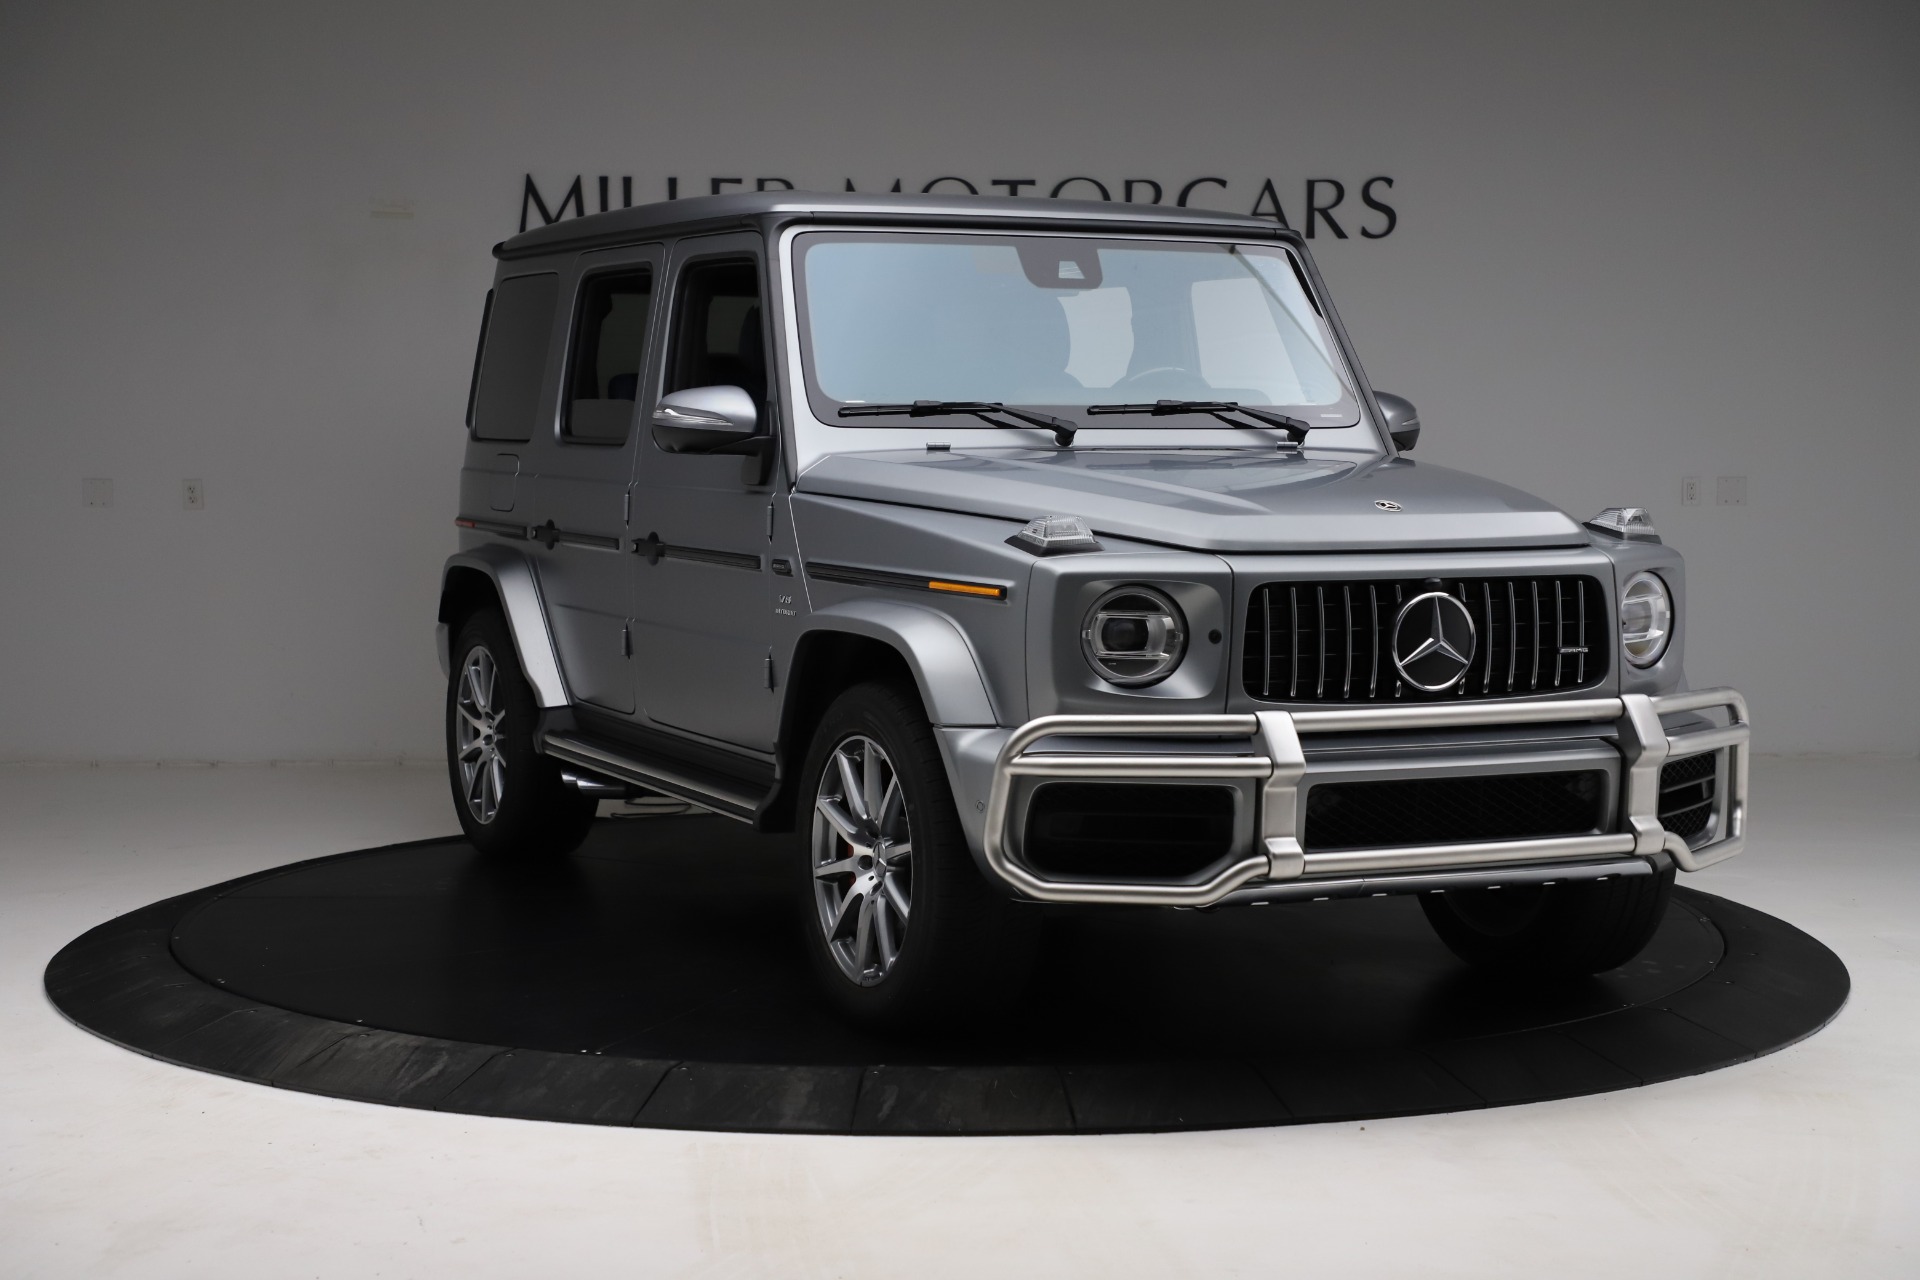 Pre Owned 21 Mercedes Benz G Class Amg G 63 For Sale Miller Motorcars Stock 8102c